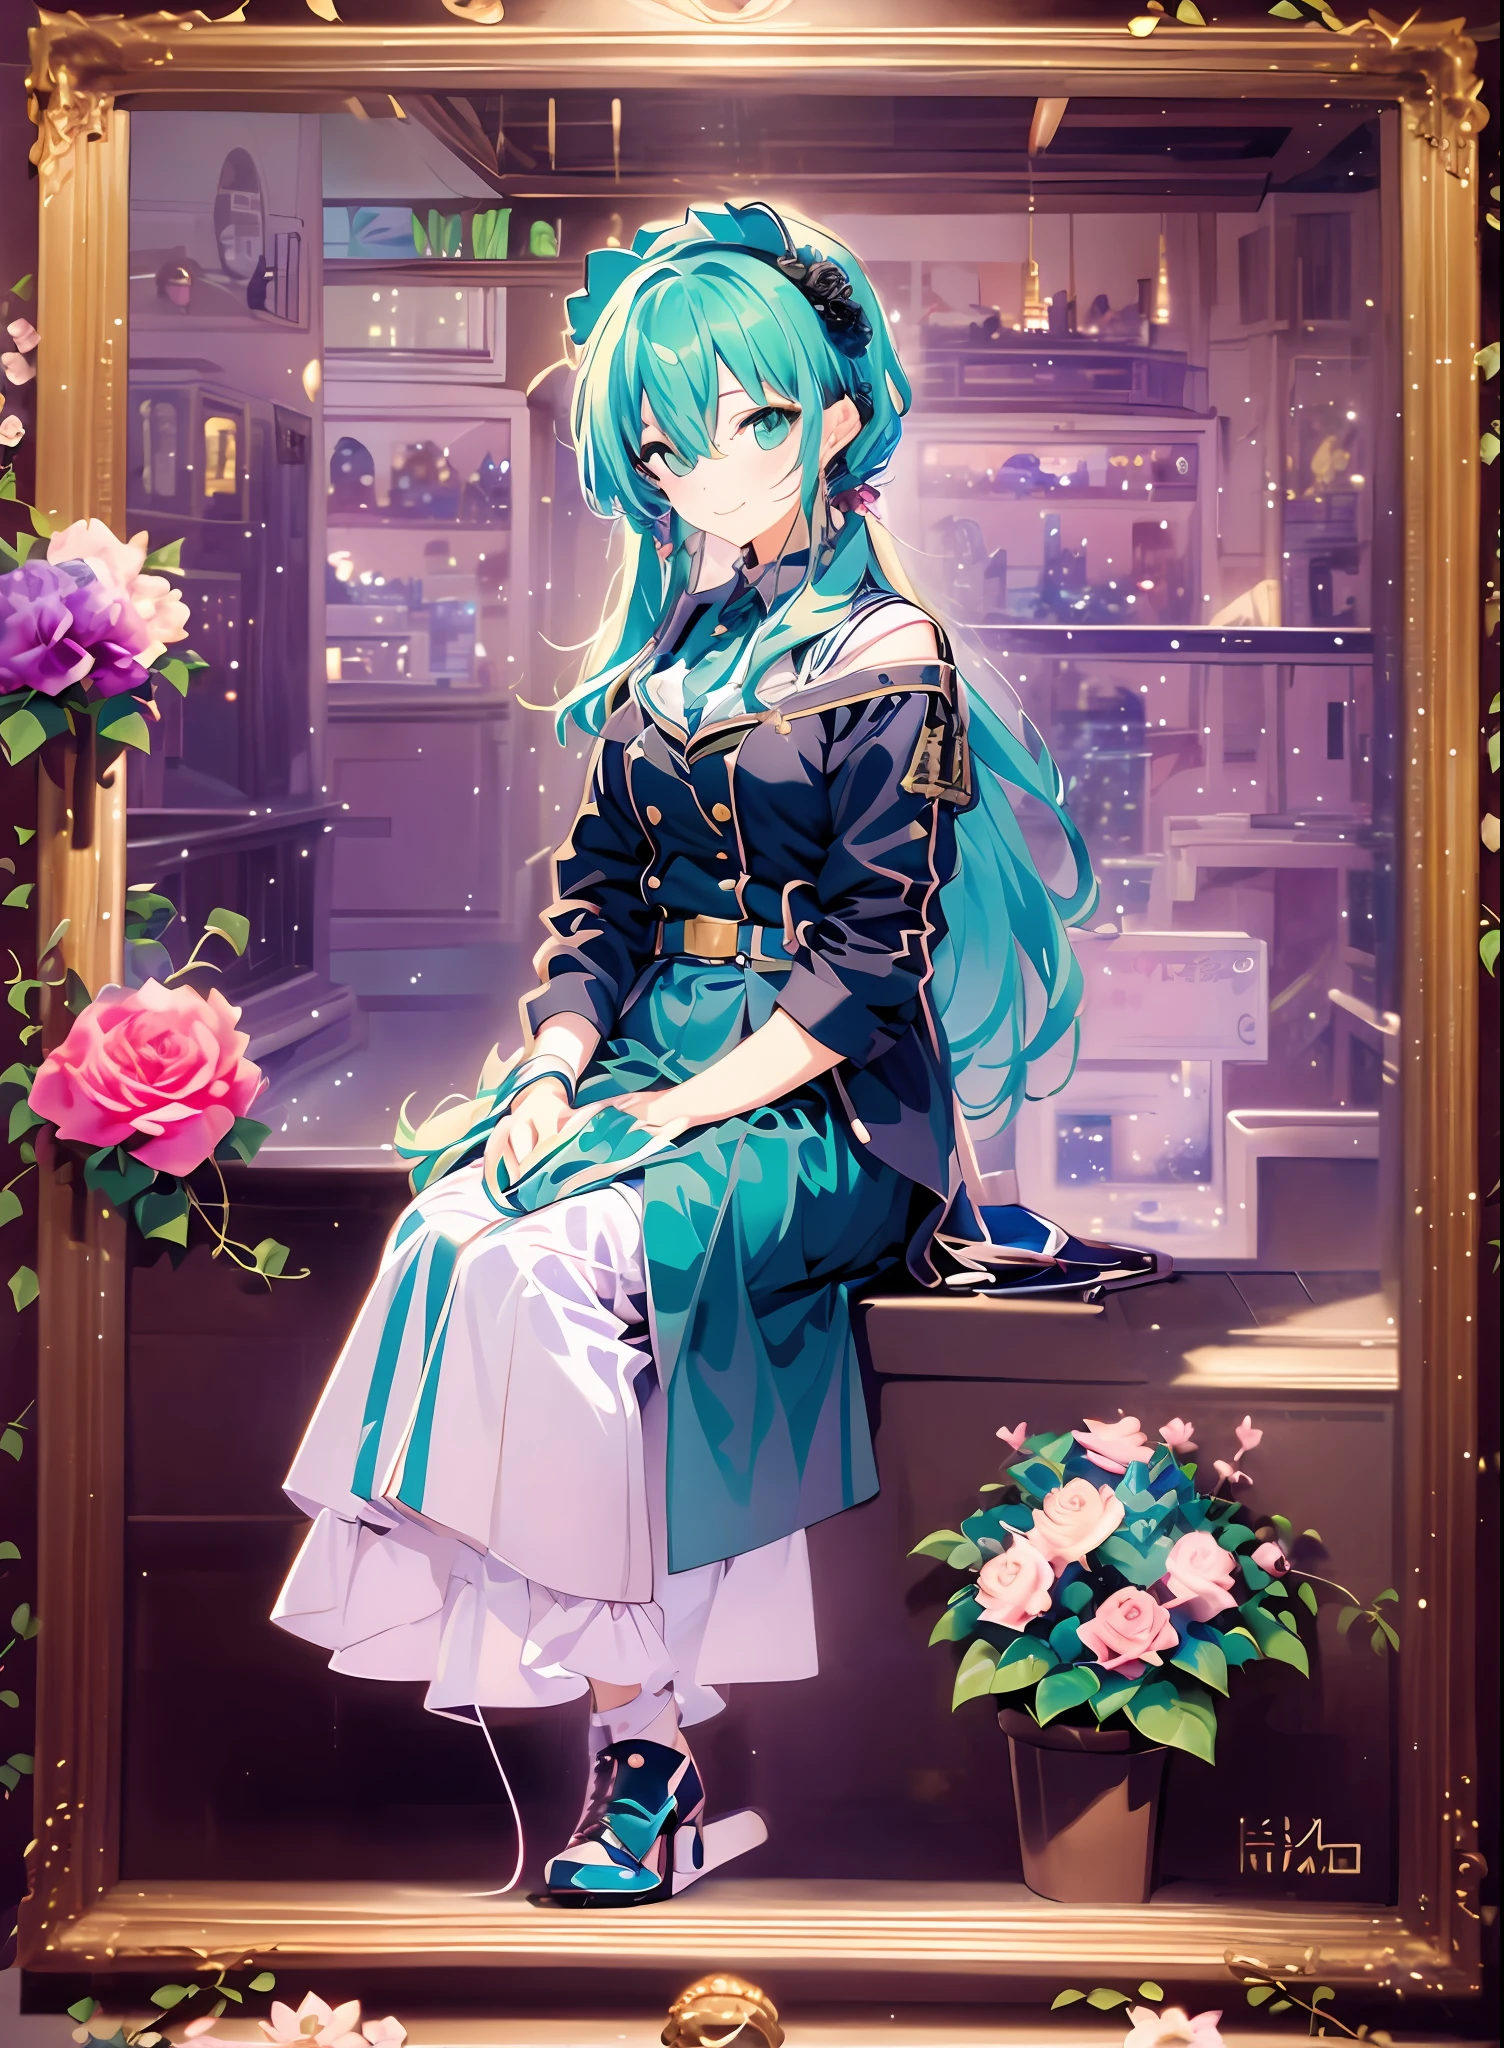 ART ofject of Picasso and Renoir, glad、Shy laughter、Gentle expression、higher detailed character facees, Serious competition、Compositions like paintings、Konmutsuki_gacha_series1, punk_rosette, cute girl, aqua color flowers, full body, elegant flowers background